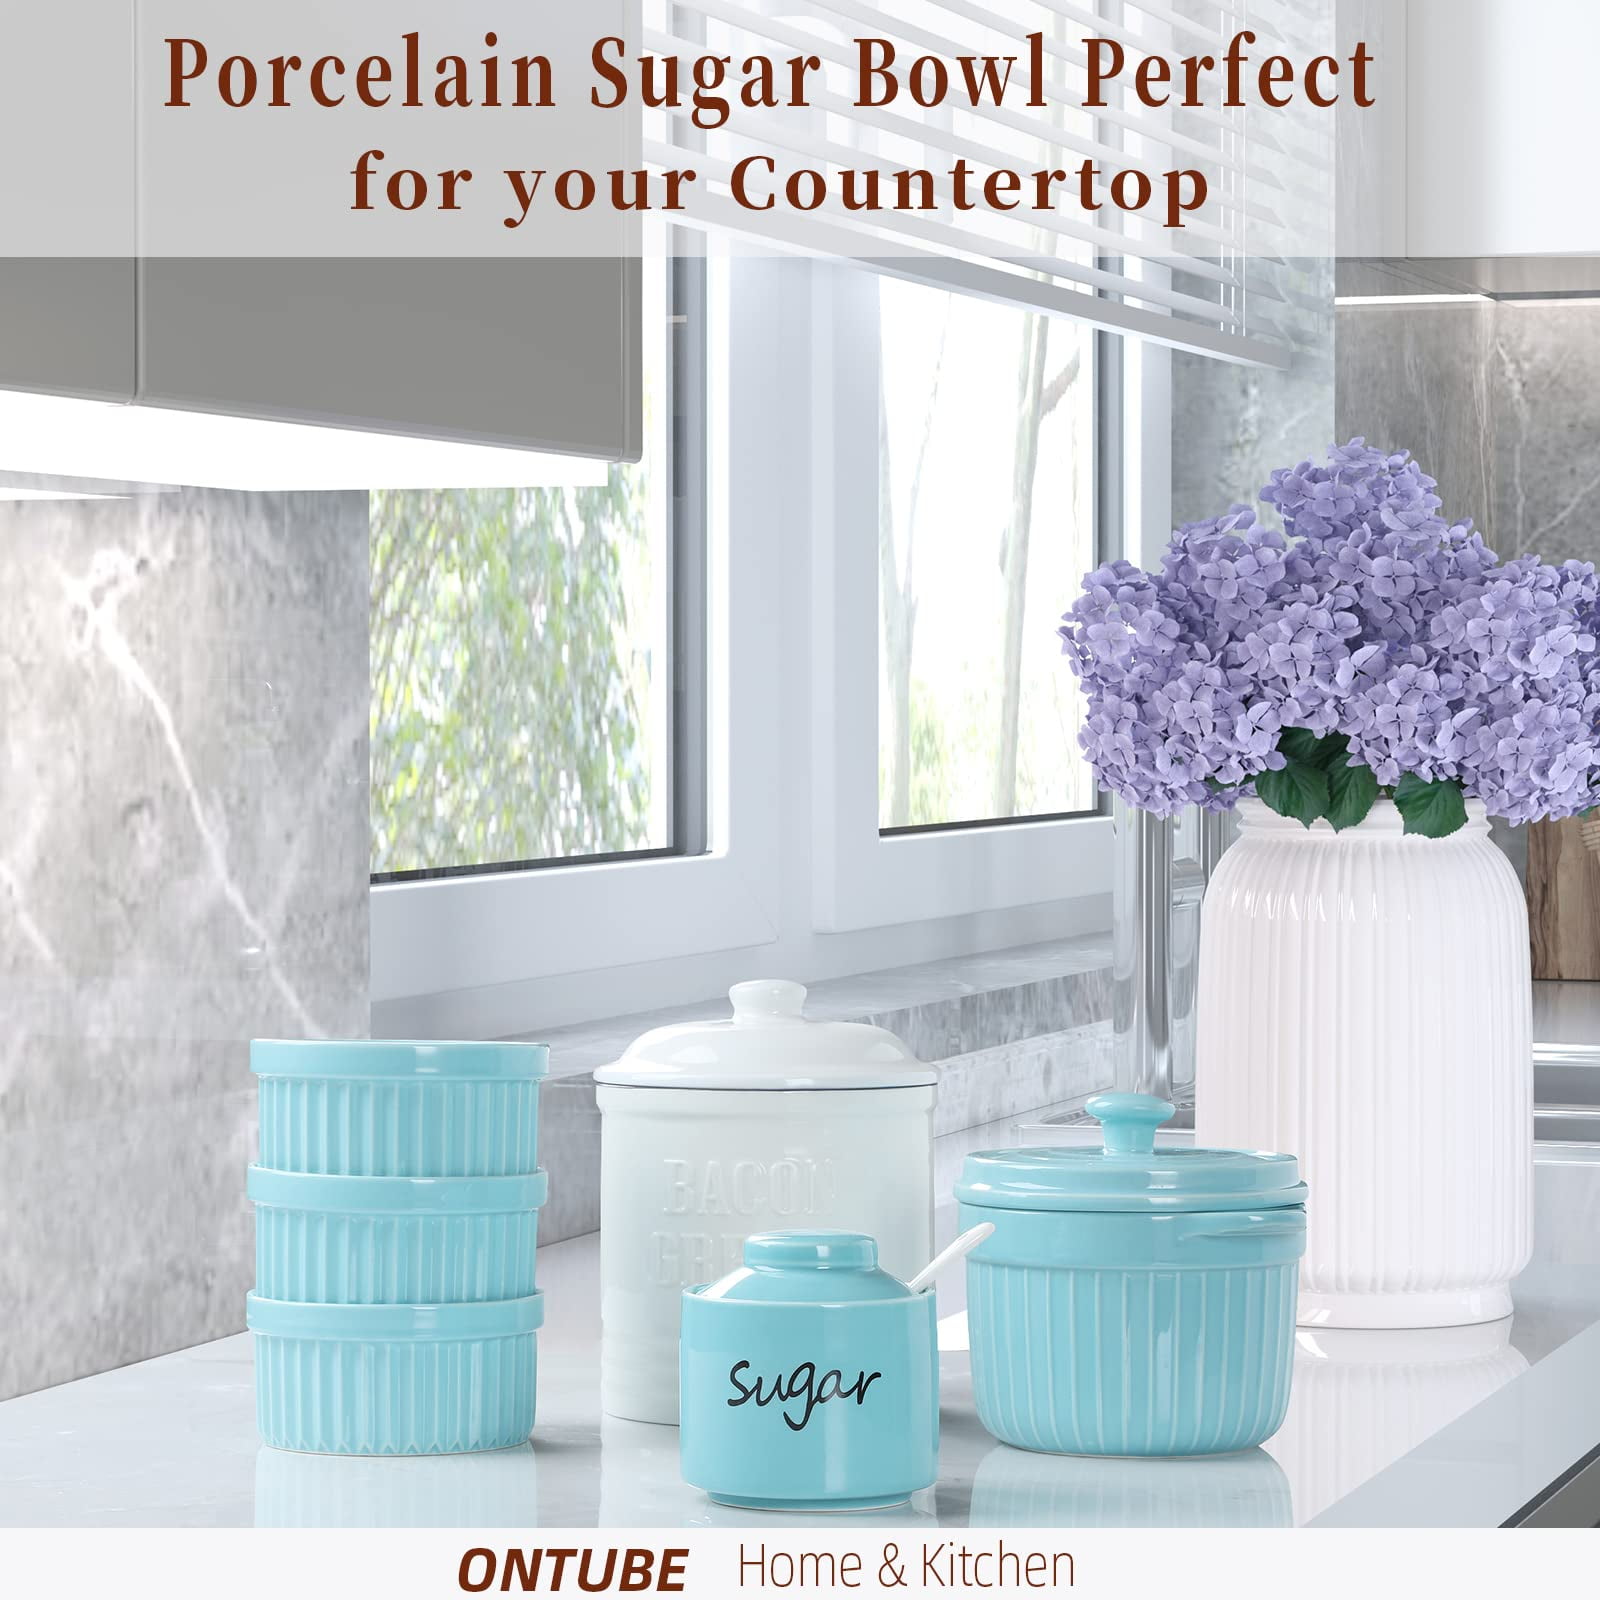 Vermida Sugar Bowl with Lids and Spoons,Ceramic Sugar Jar with Spoon and  Tray,Porcelain Sugar Container with Labels for Kitchen,Sugar Holder for